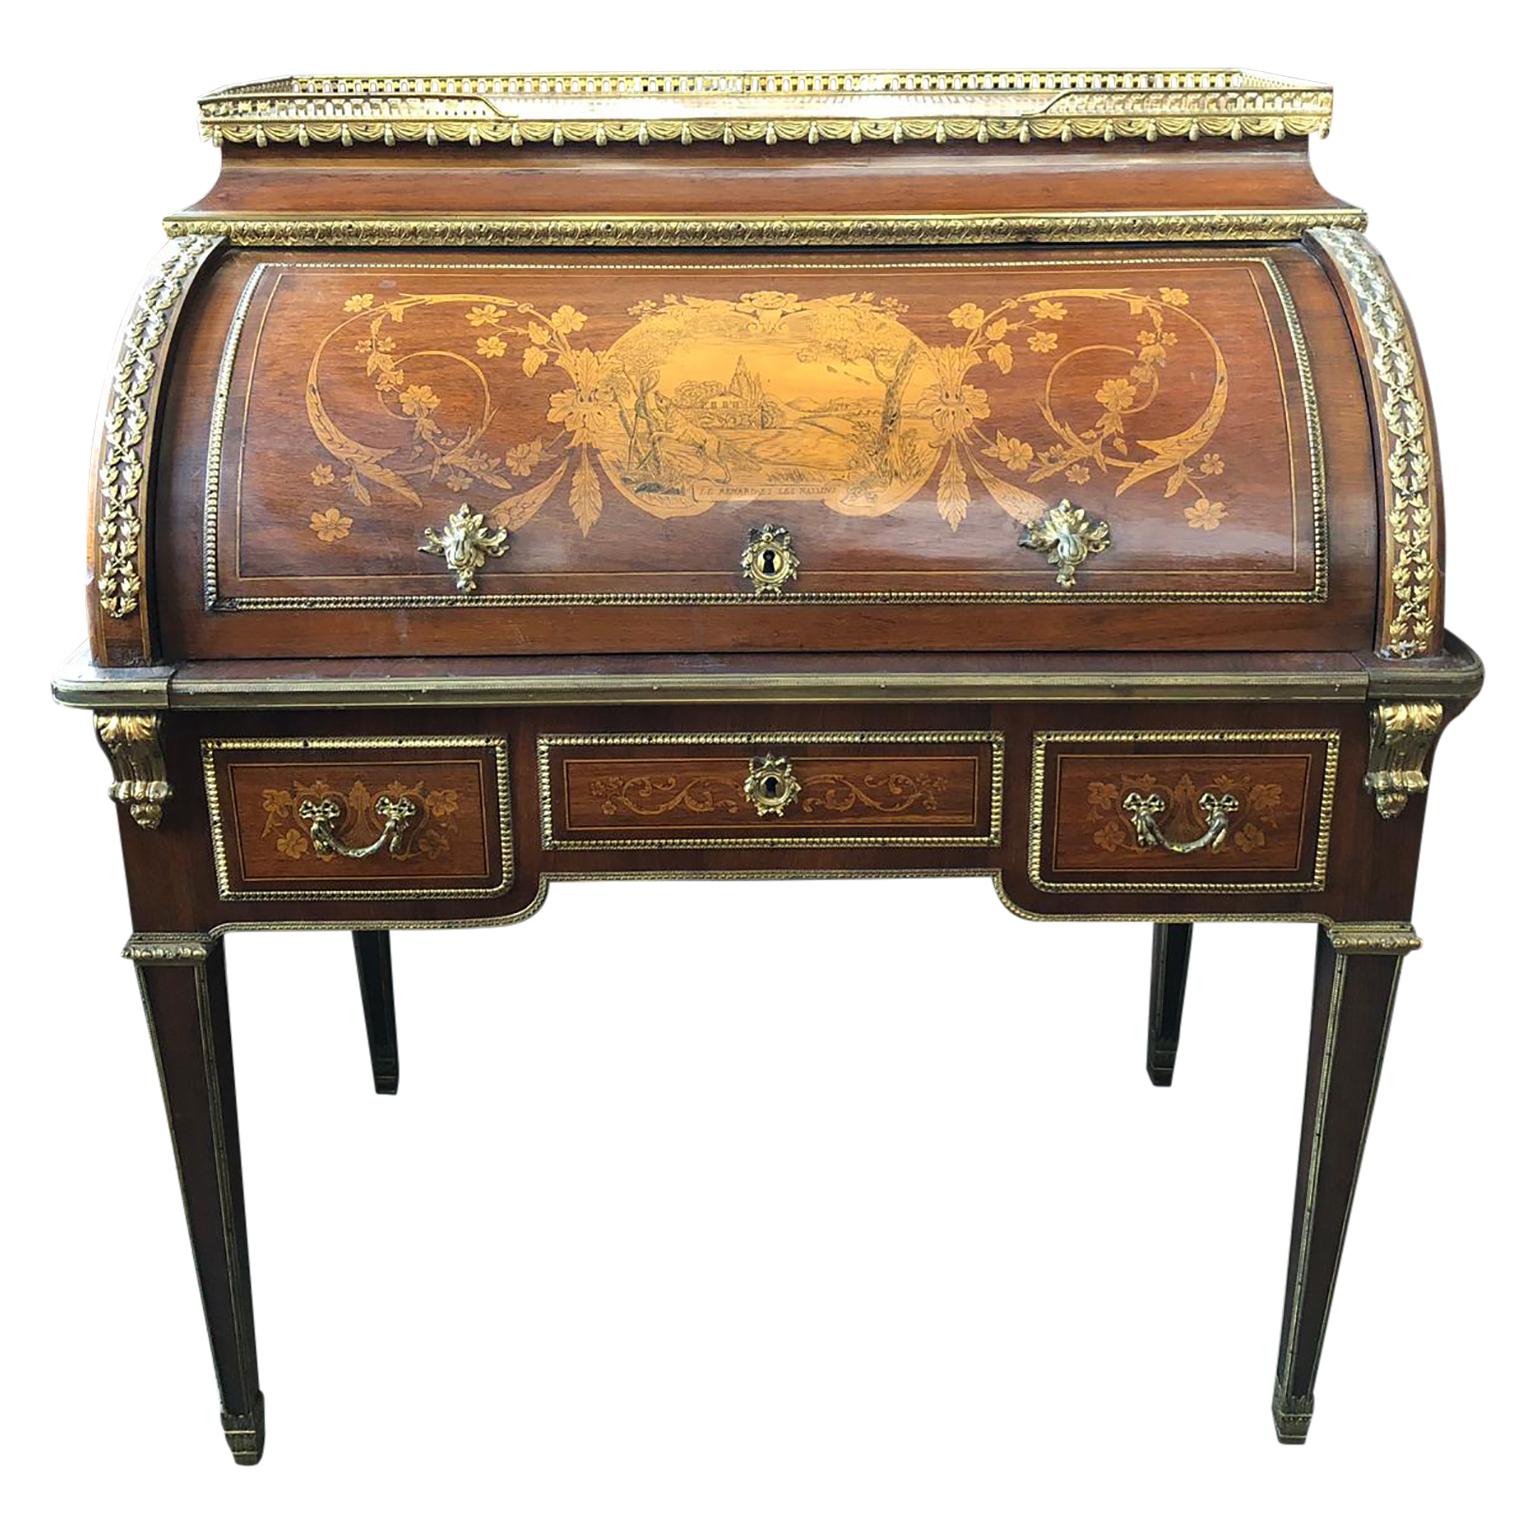 Superior 19th century French Louis XVI style parquetry/marquetry cylinder desk. It has a pierced brass galleried top over a stunning foliate and lyre inlaid parquetry cylinder which encloses a fitted interior with three drawers and a pull out /